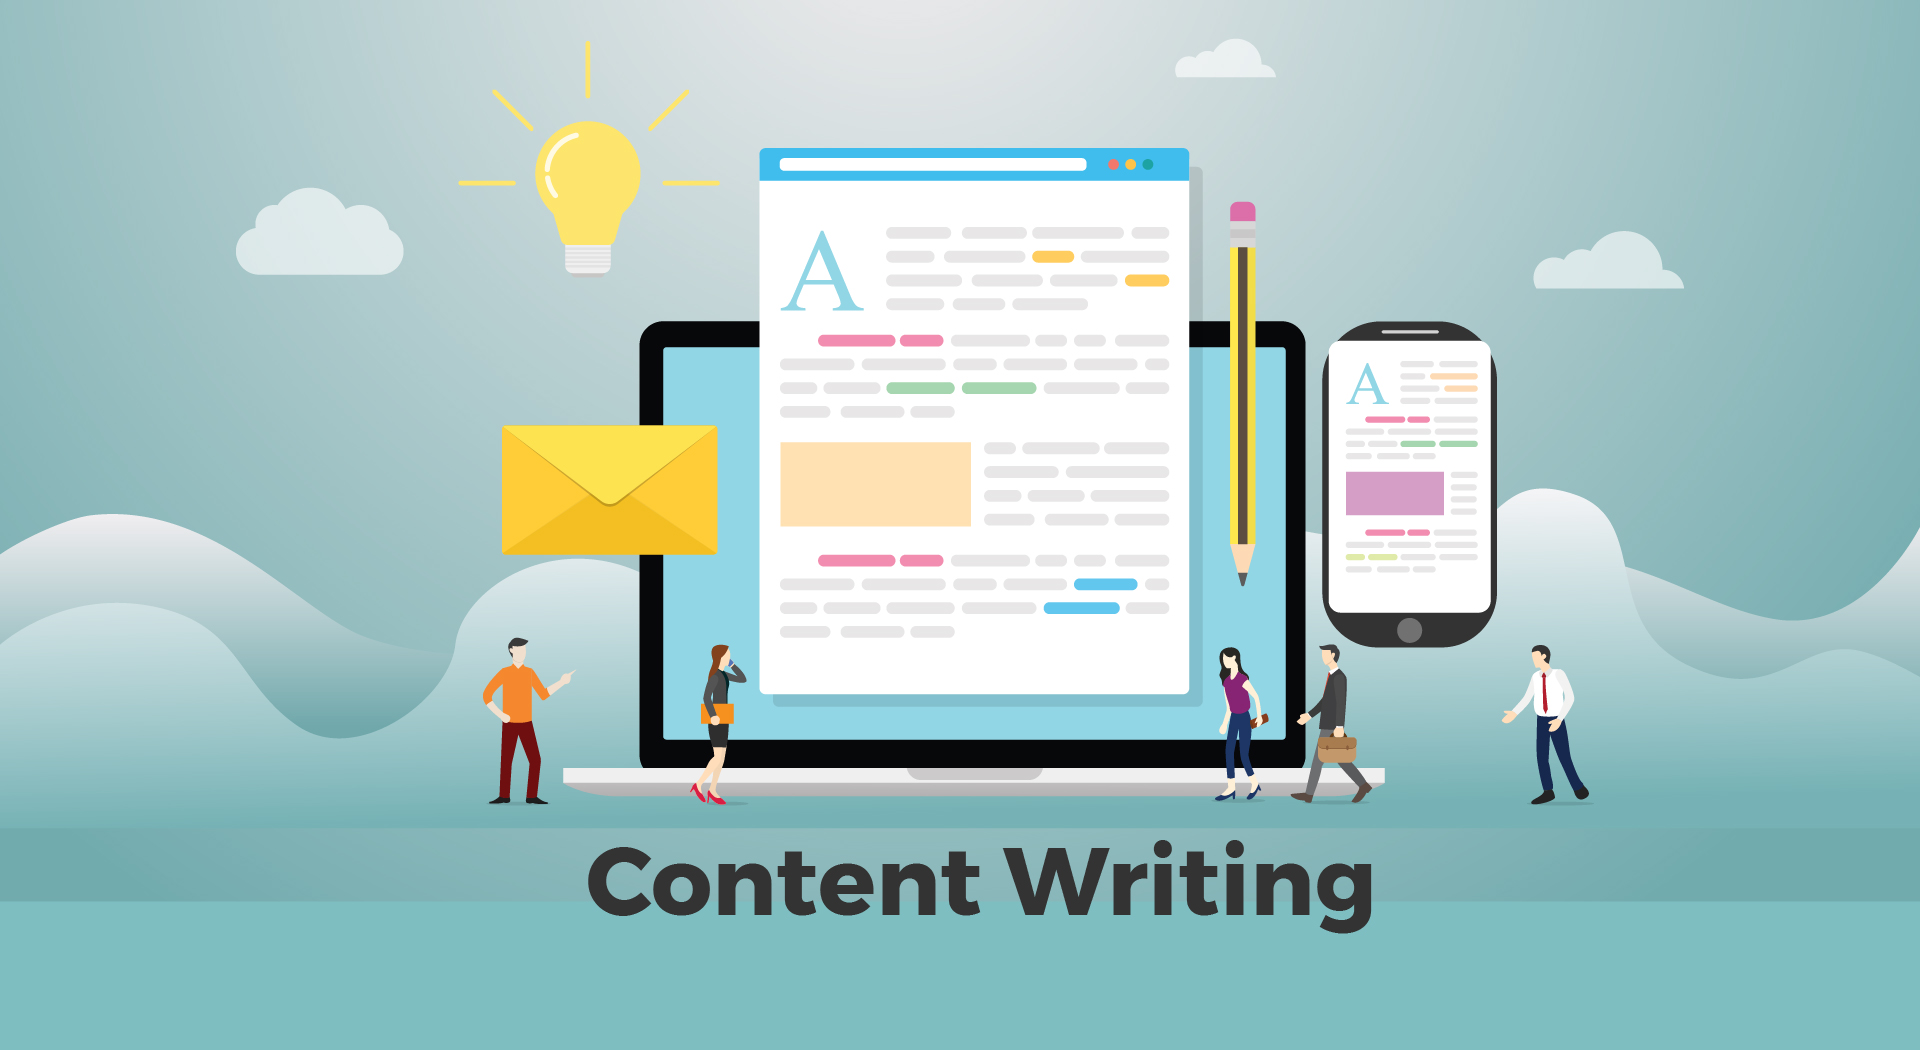 Best Content Writing agency in the World

